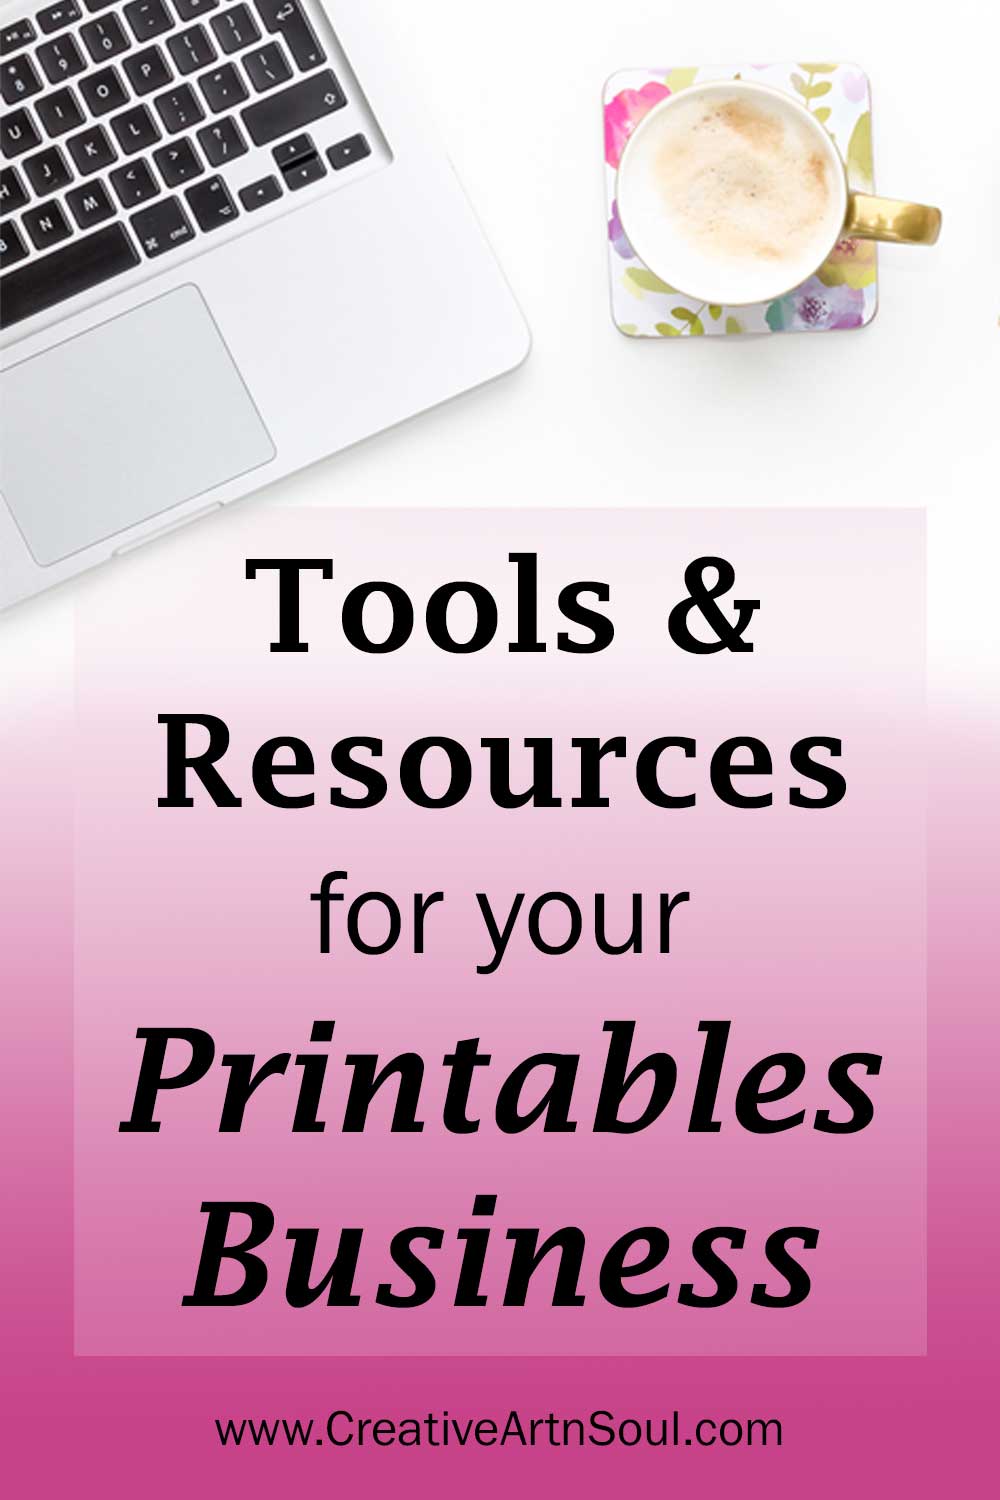 Tools & Resources for your Printables Business